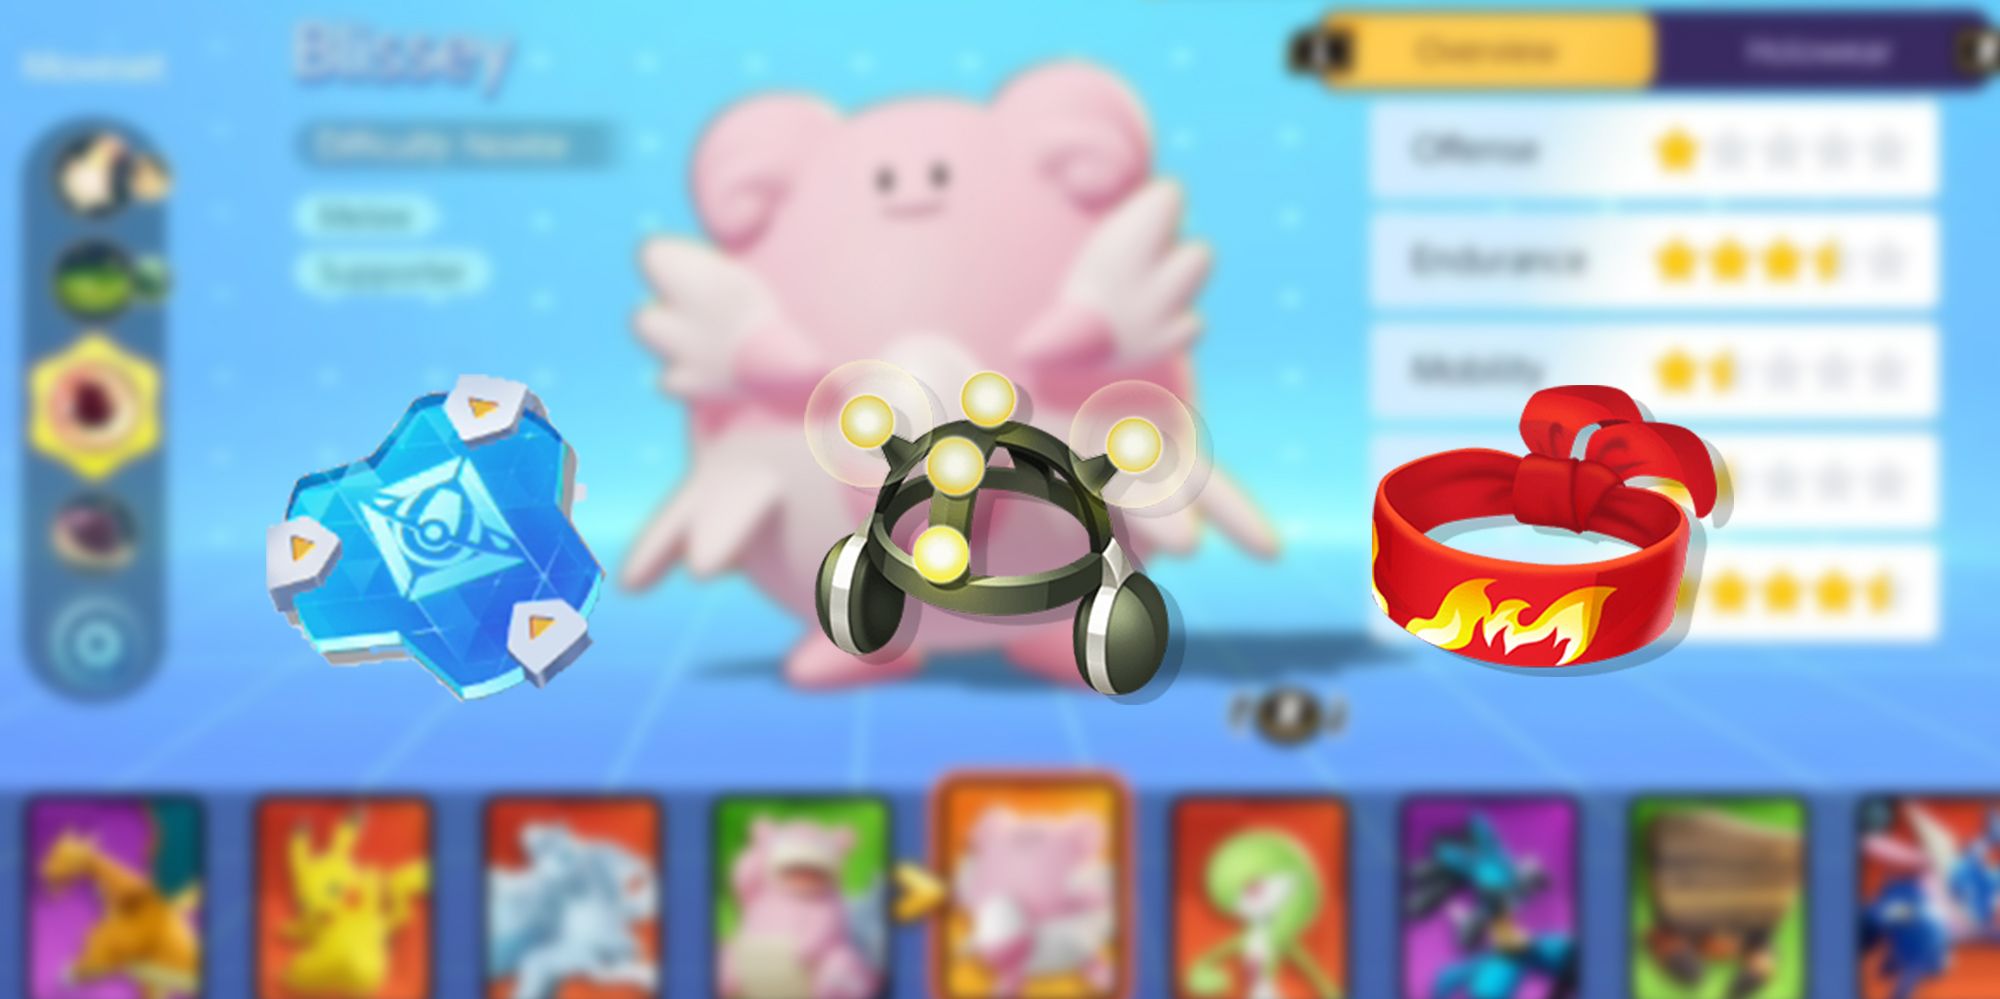 Pokemon Unite - Blurred Image Of Blissey In The Pokemon Screen With Their Typically Held Item PNGs Overlaid On Top